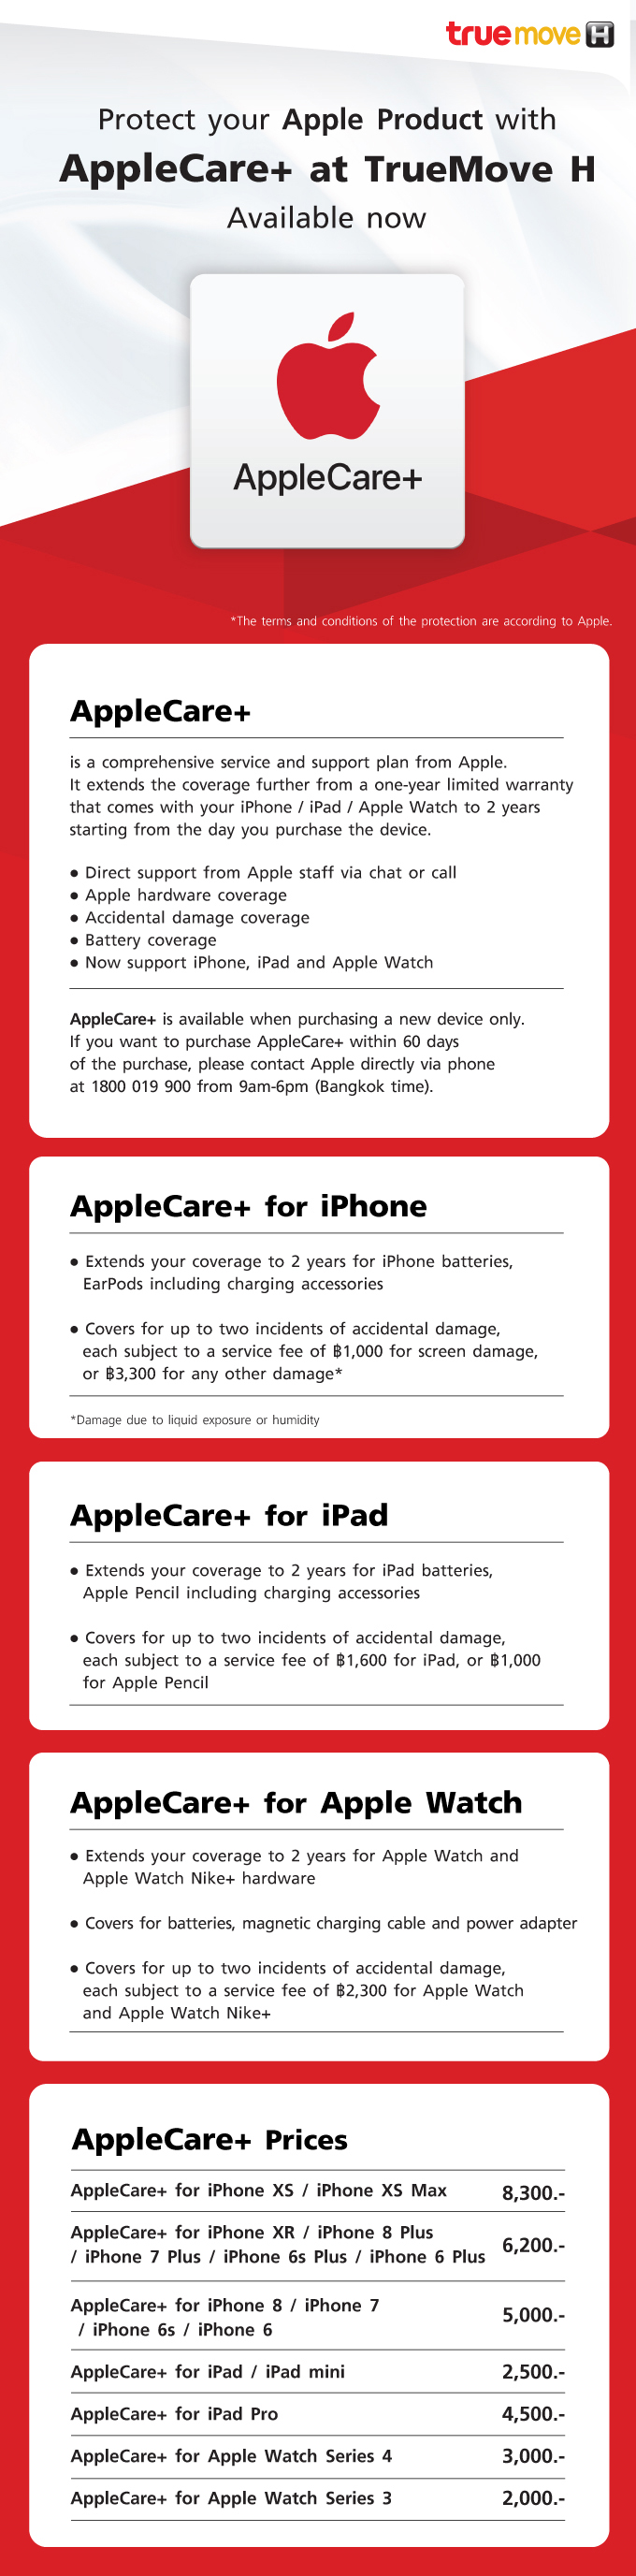 Protect your Apple Product with AppleCare+ at TrueMove H. Available now